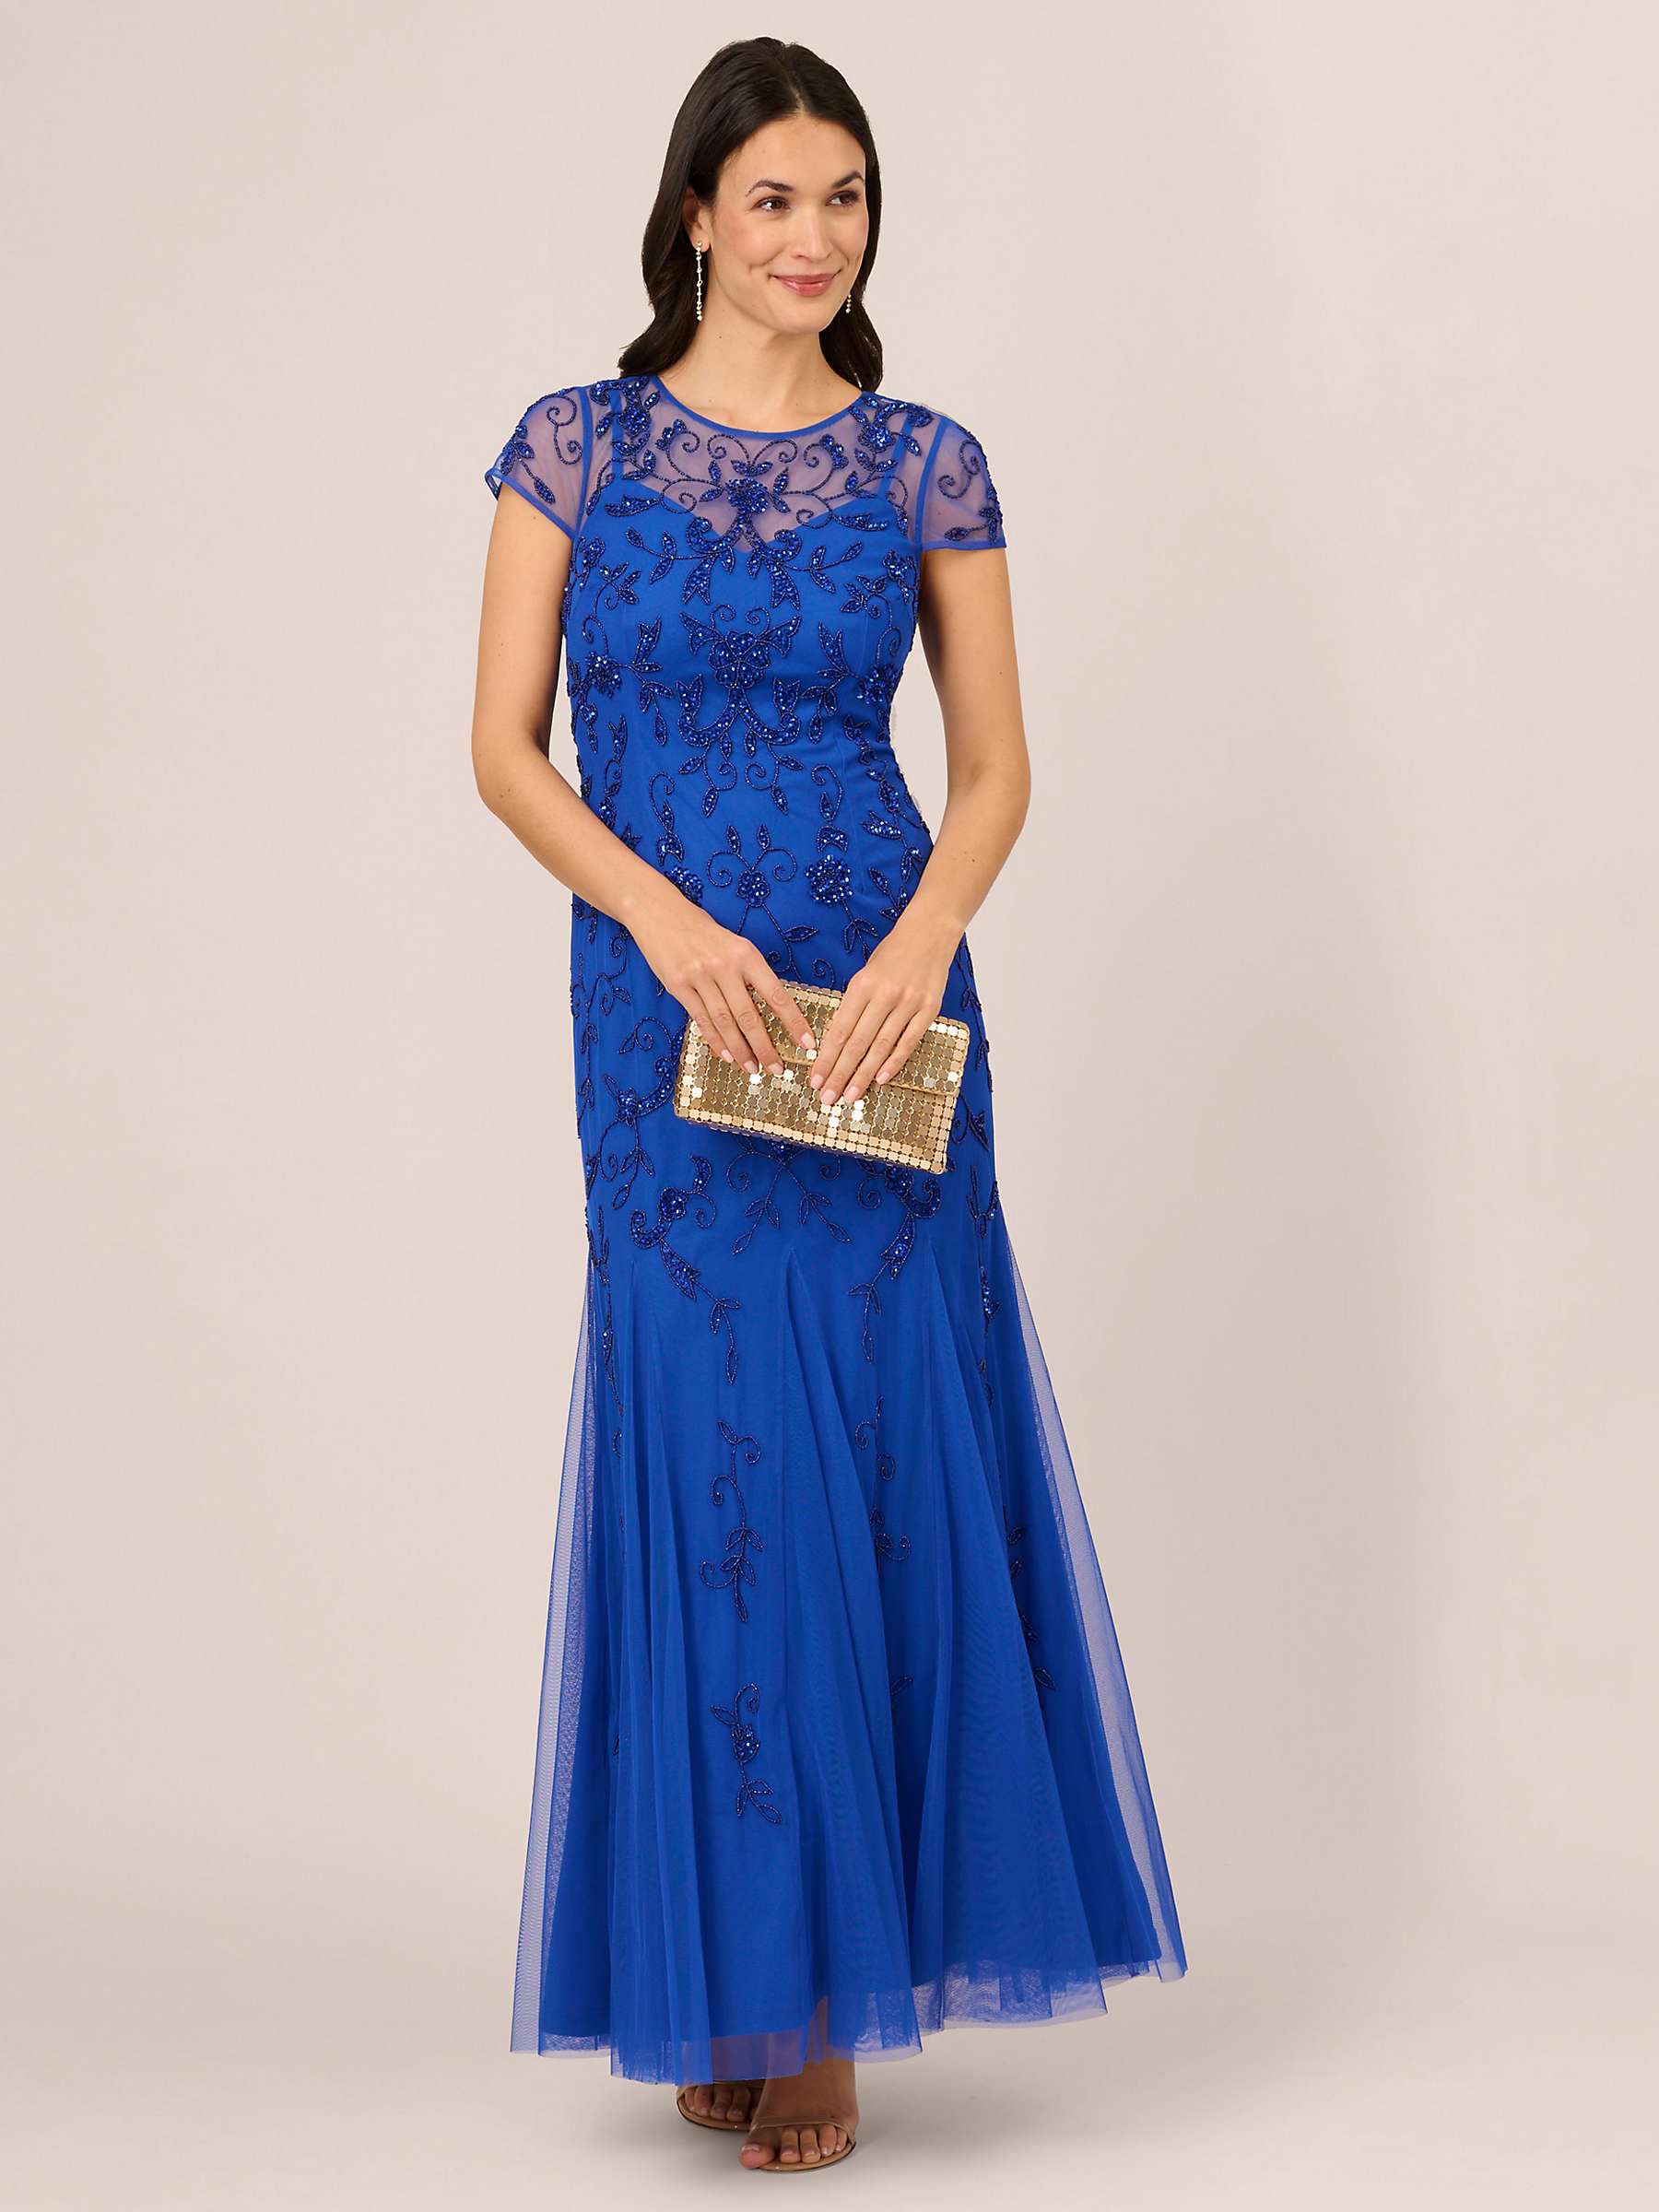 Buy Adrianna Papell Papell Studio Beaded Mesh Maxi Dress, Brilliant Sapphire Online at johnlewis.com